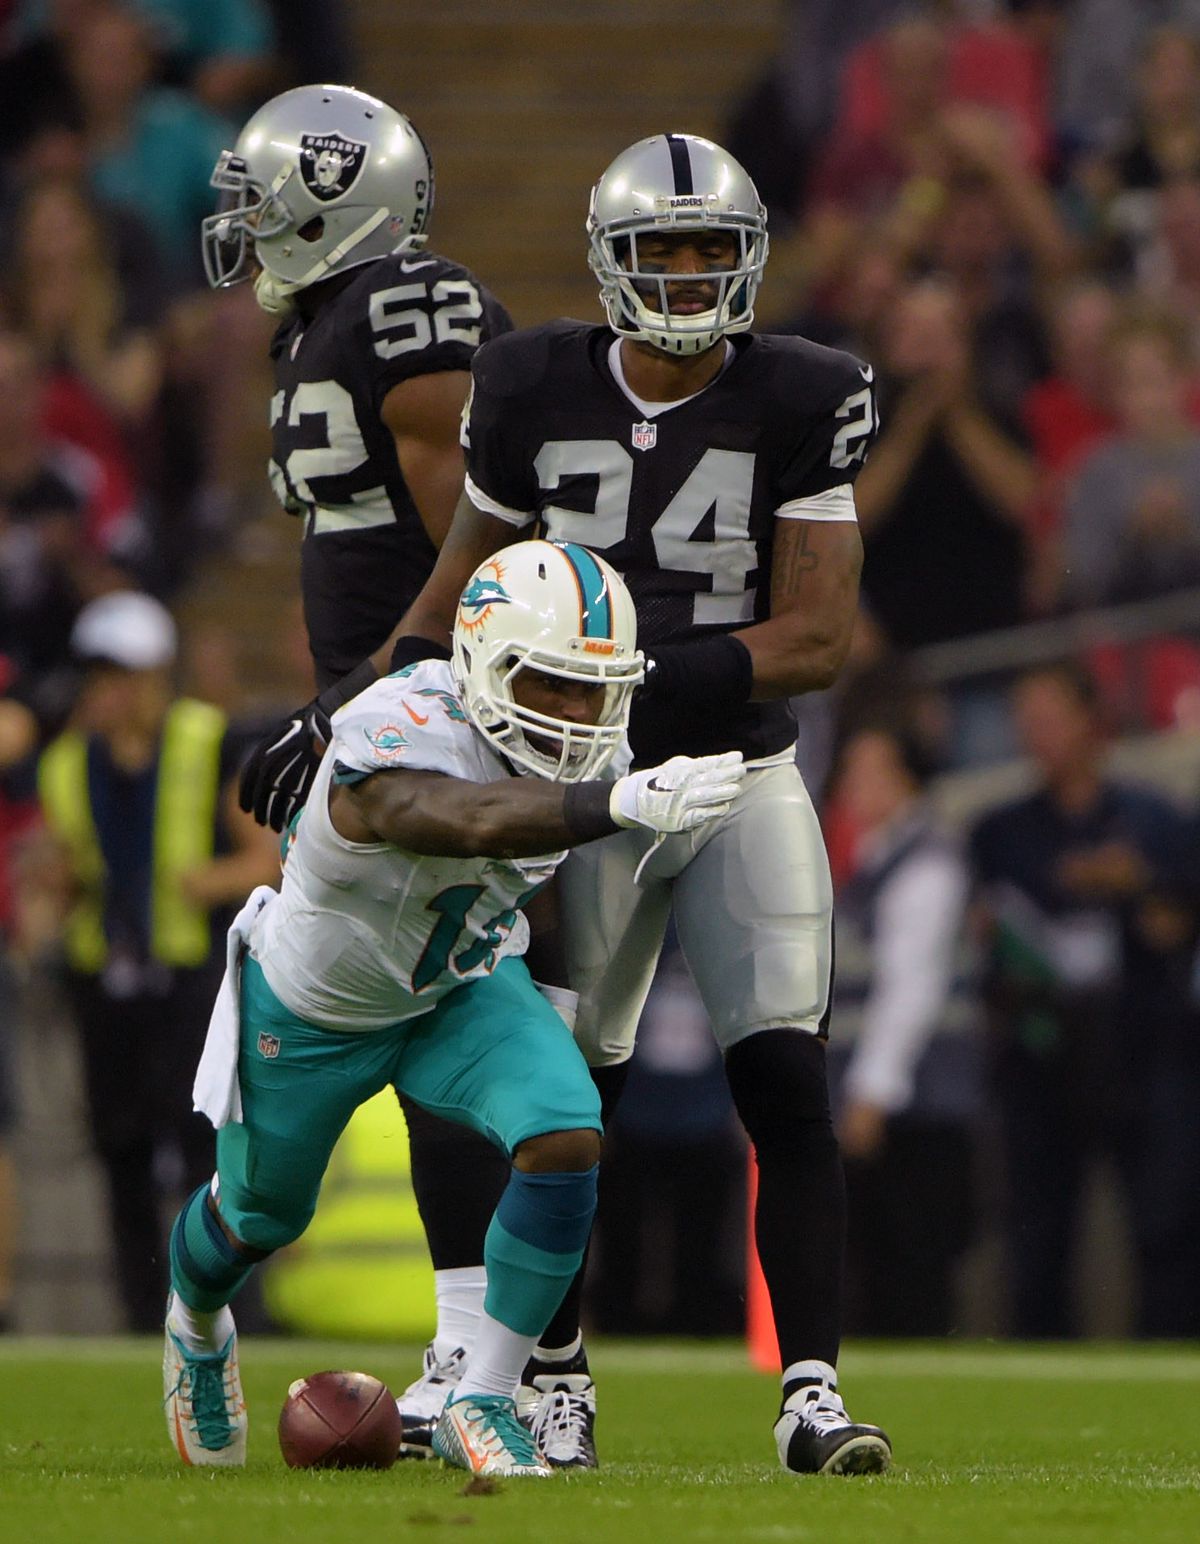 NFL: International Series-Miami Dolphins at Oakland Raiders